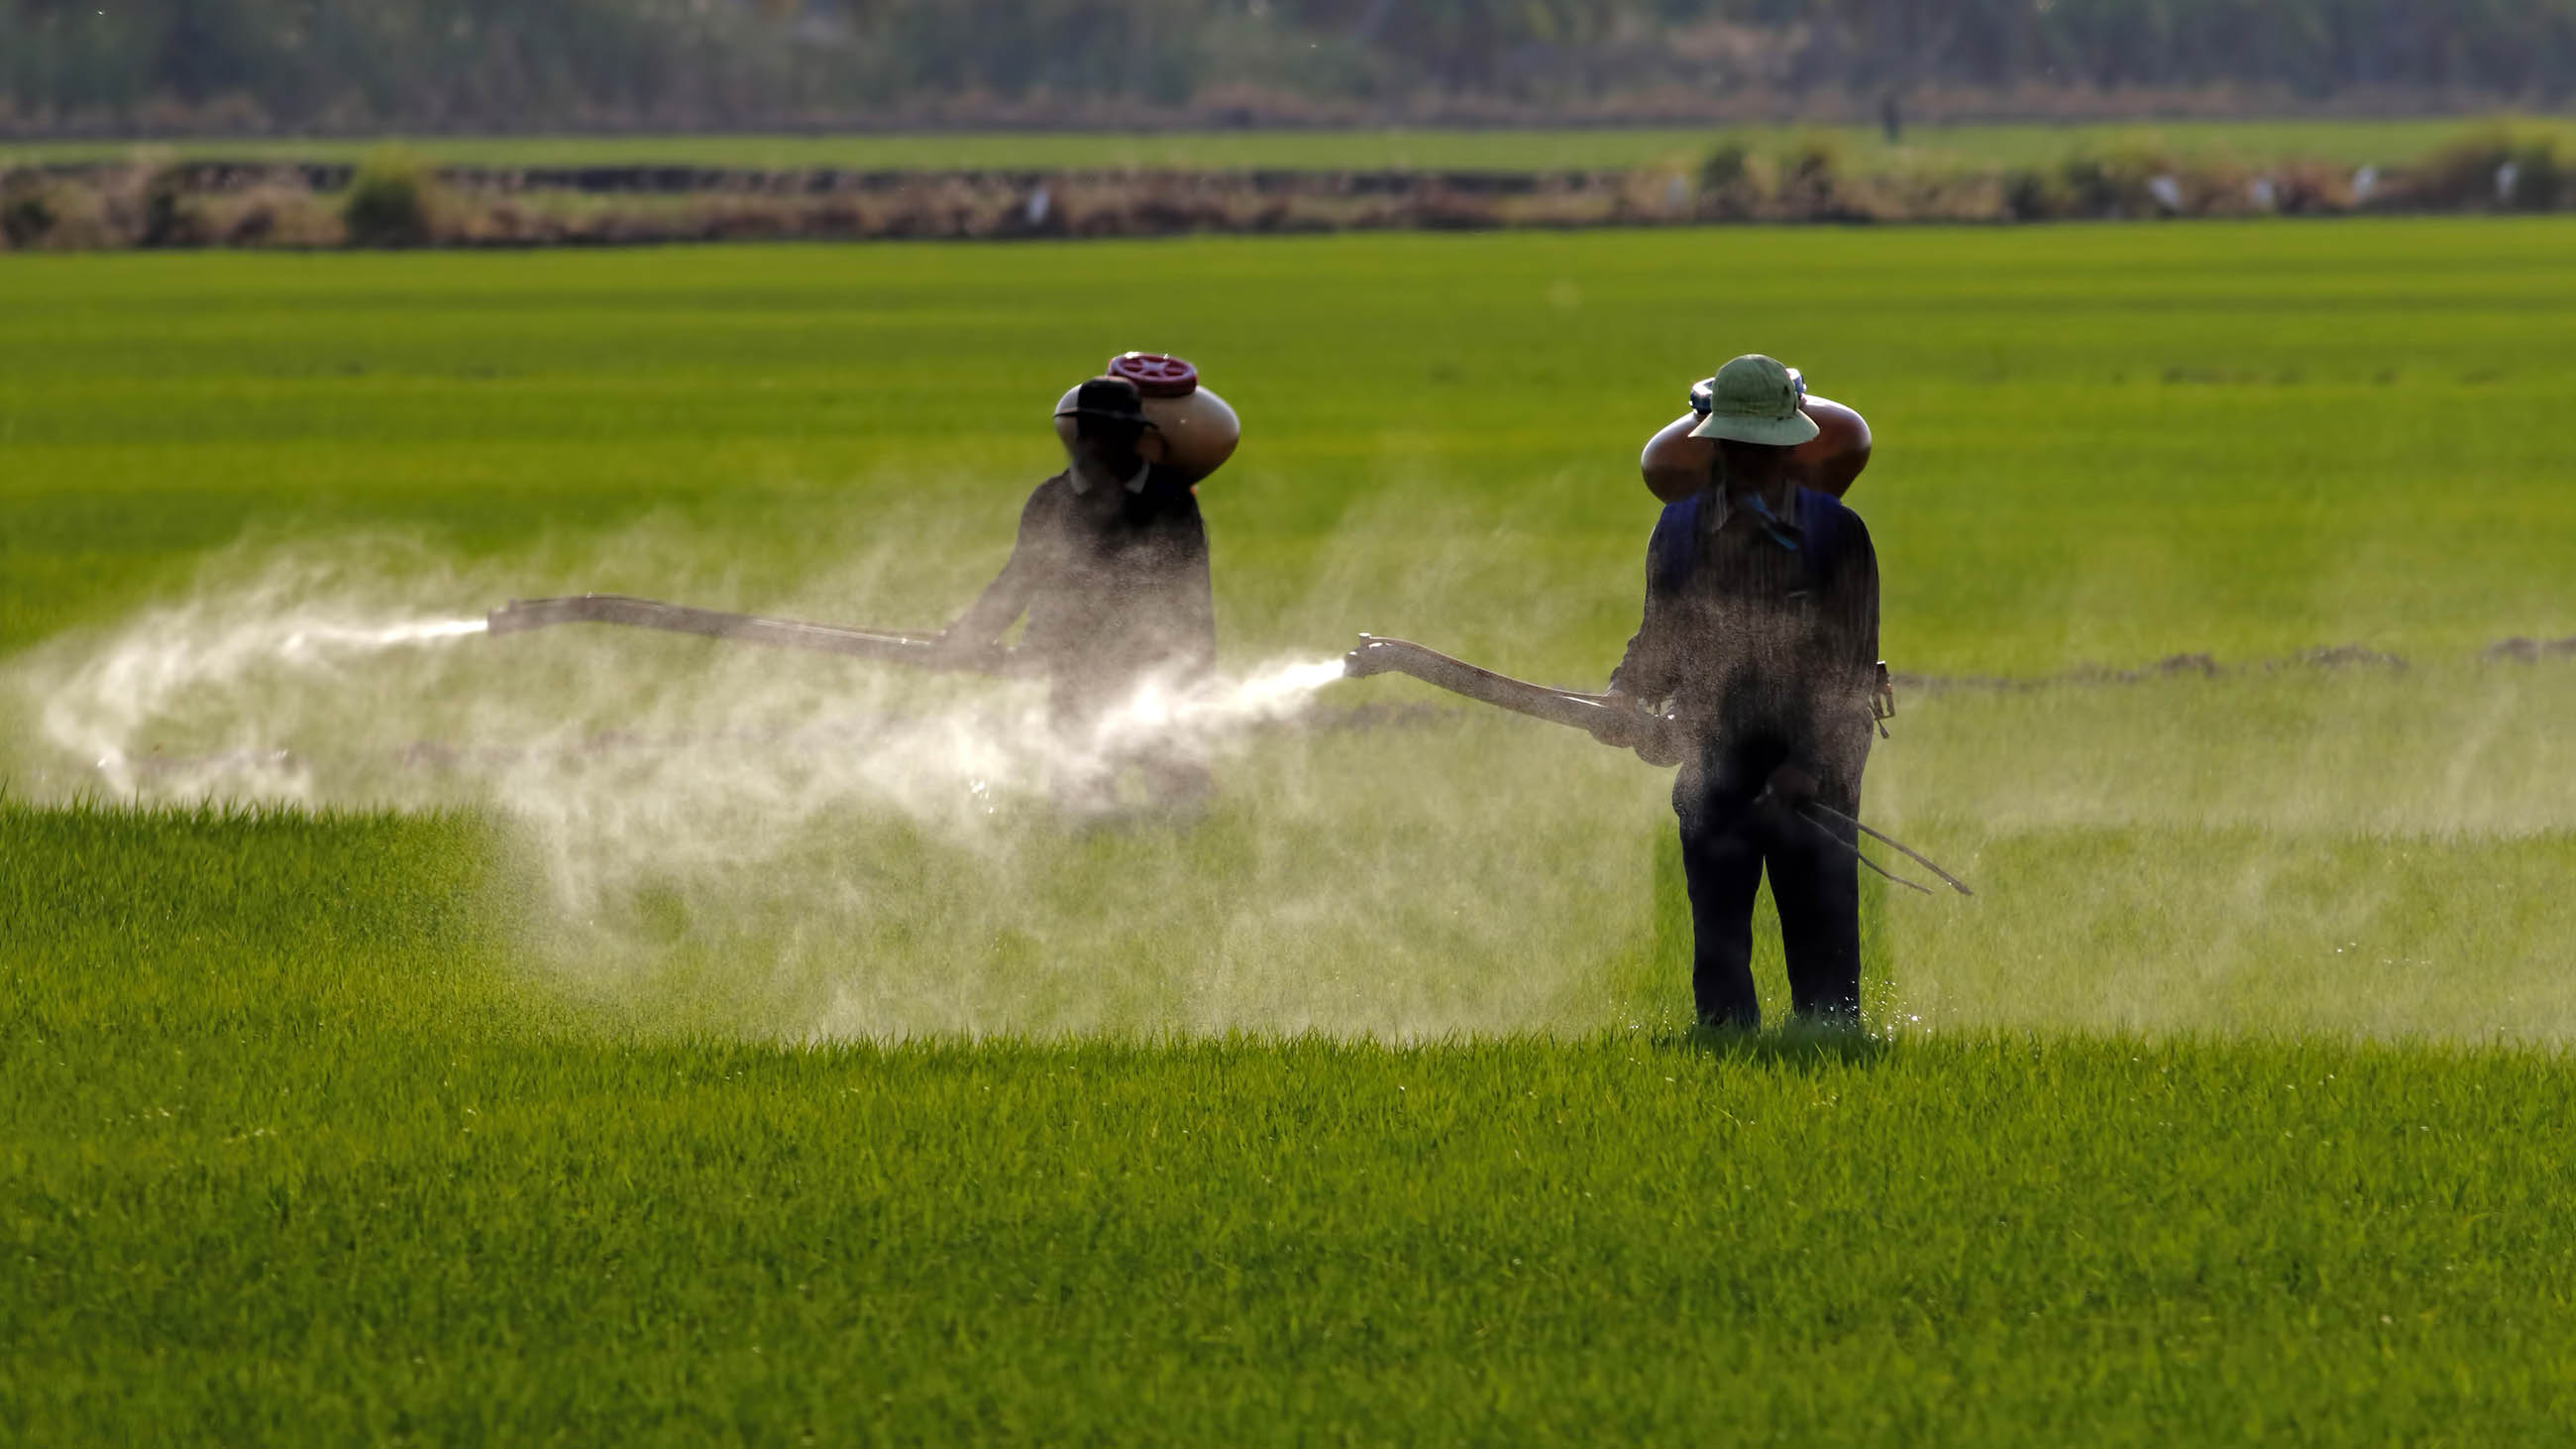 Pesticide dependence in the developing world is a problem, but there are solutions.